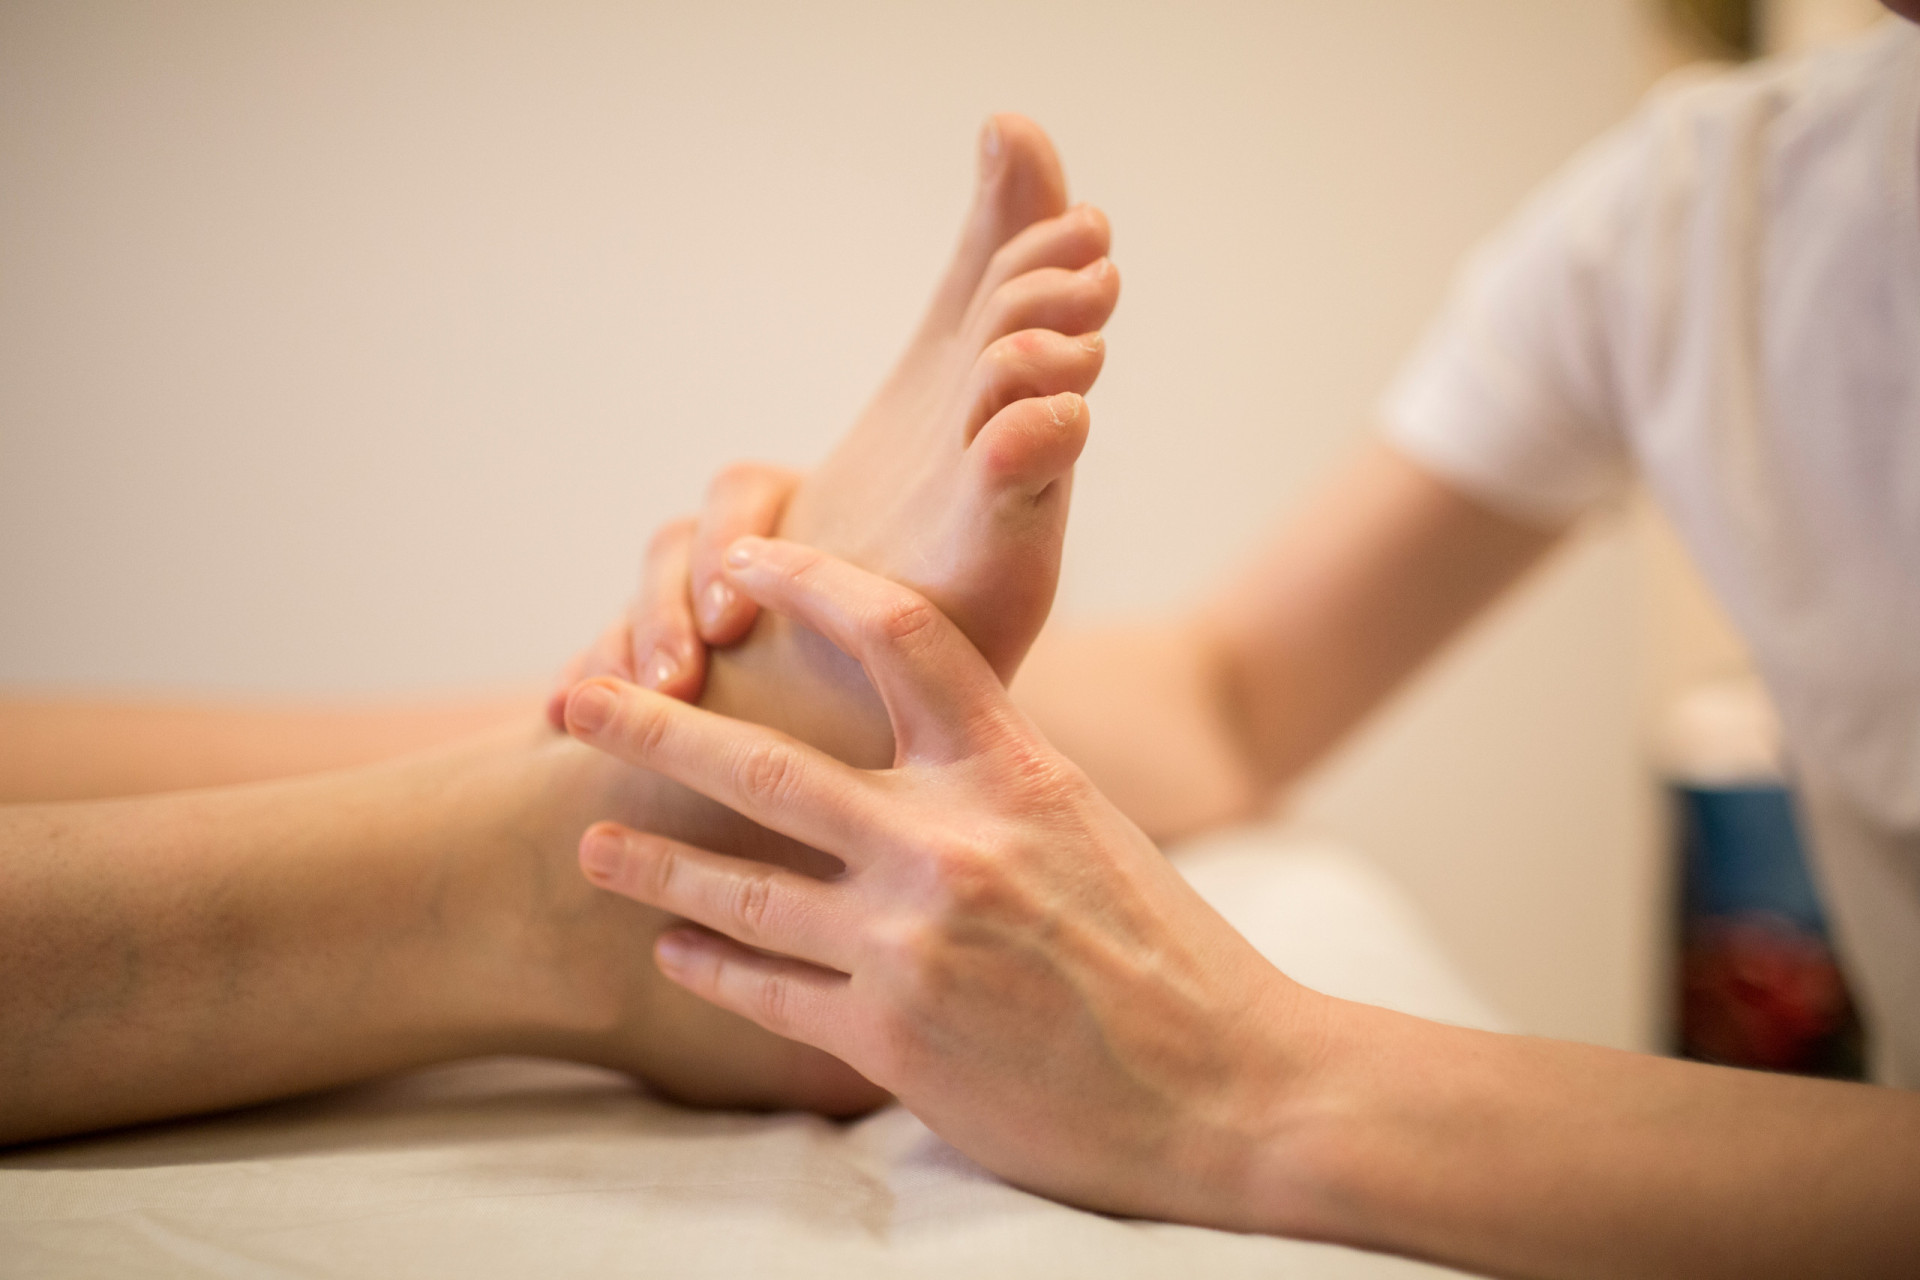 <p>Reflexology is a type of <a href="https://www.starsinsider.com/health/421167/self-massage-tips-to-ease-aches-and-pains" rel="noopener">massage</a> that's based on the premise that areas and organs in the body are linked to reflex areas on the hands, feet, and ears. The practice is considered a complementary therapy, meaning that it shouldn't replace conventional medical care. And while it still needs more scientific research to prove that it can prevent or cure any type of disease, some studies show it may help relieve certain symptoms, such as pain and anxiety.</p> <p>Intrigued? Click on to learn more about how reflexology works and whether you should try it.</p>